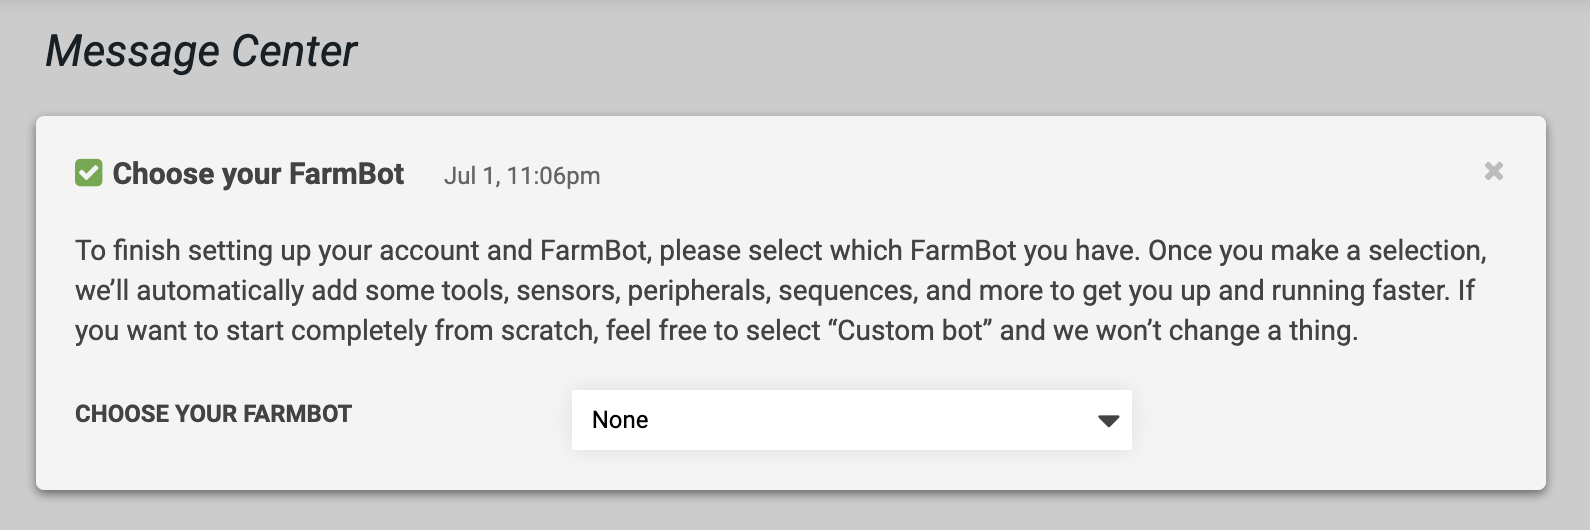 Choose your FarmBot.png